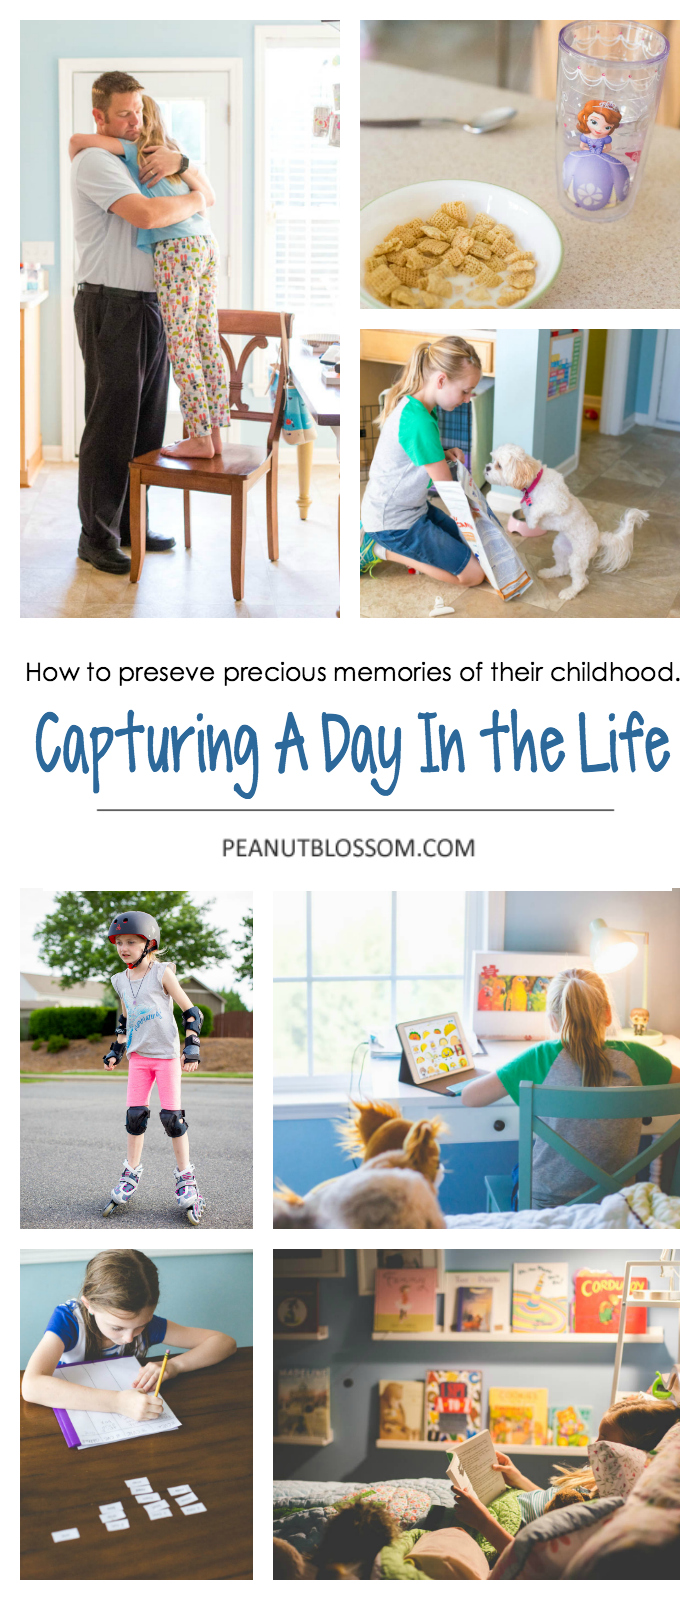 How to capture a Day in the Life photo project